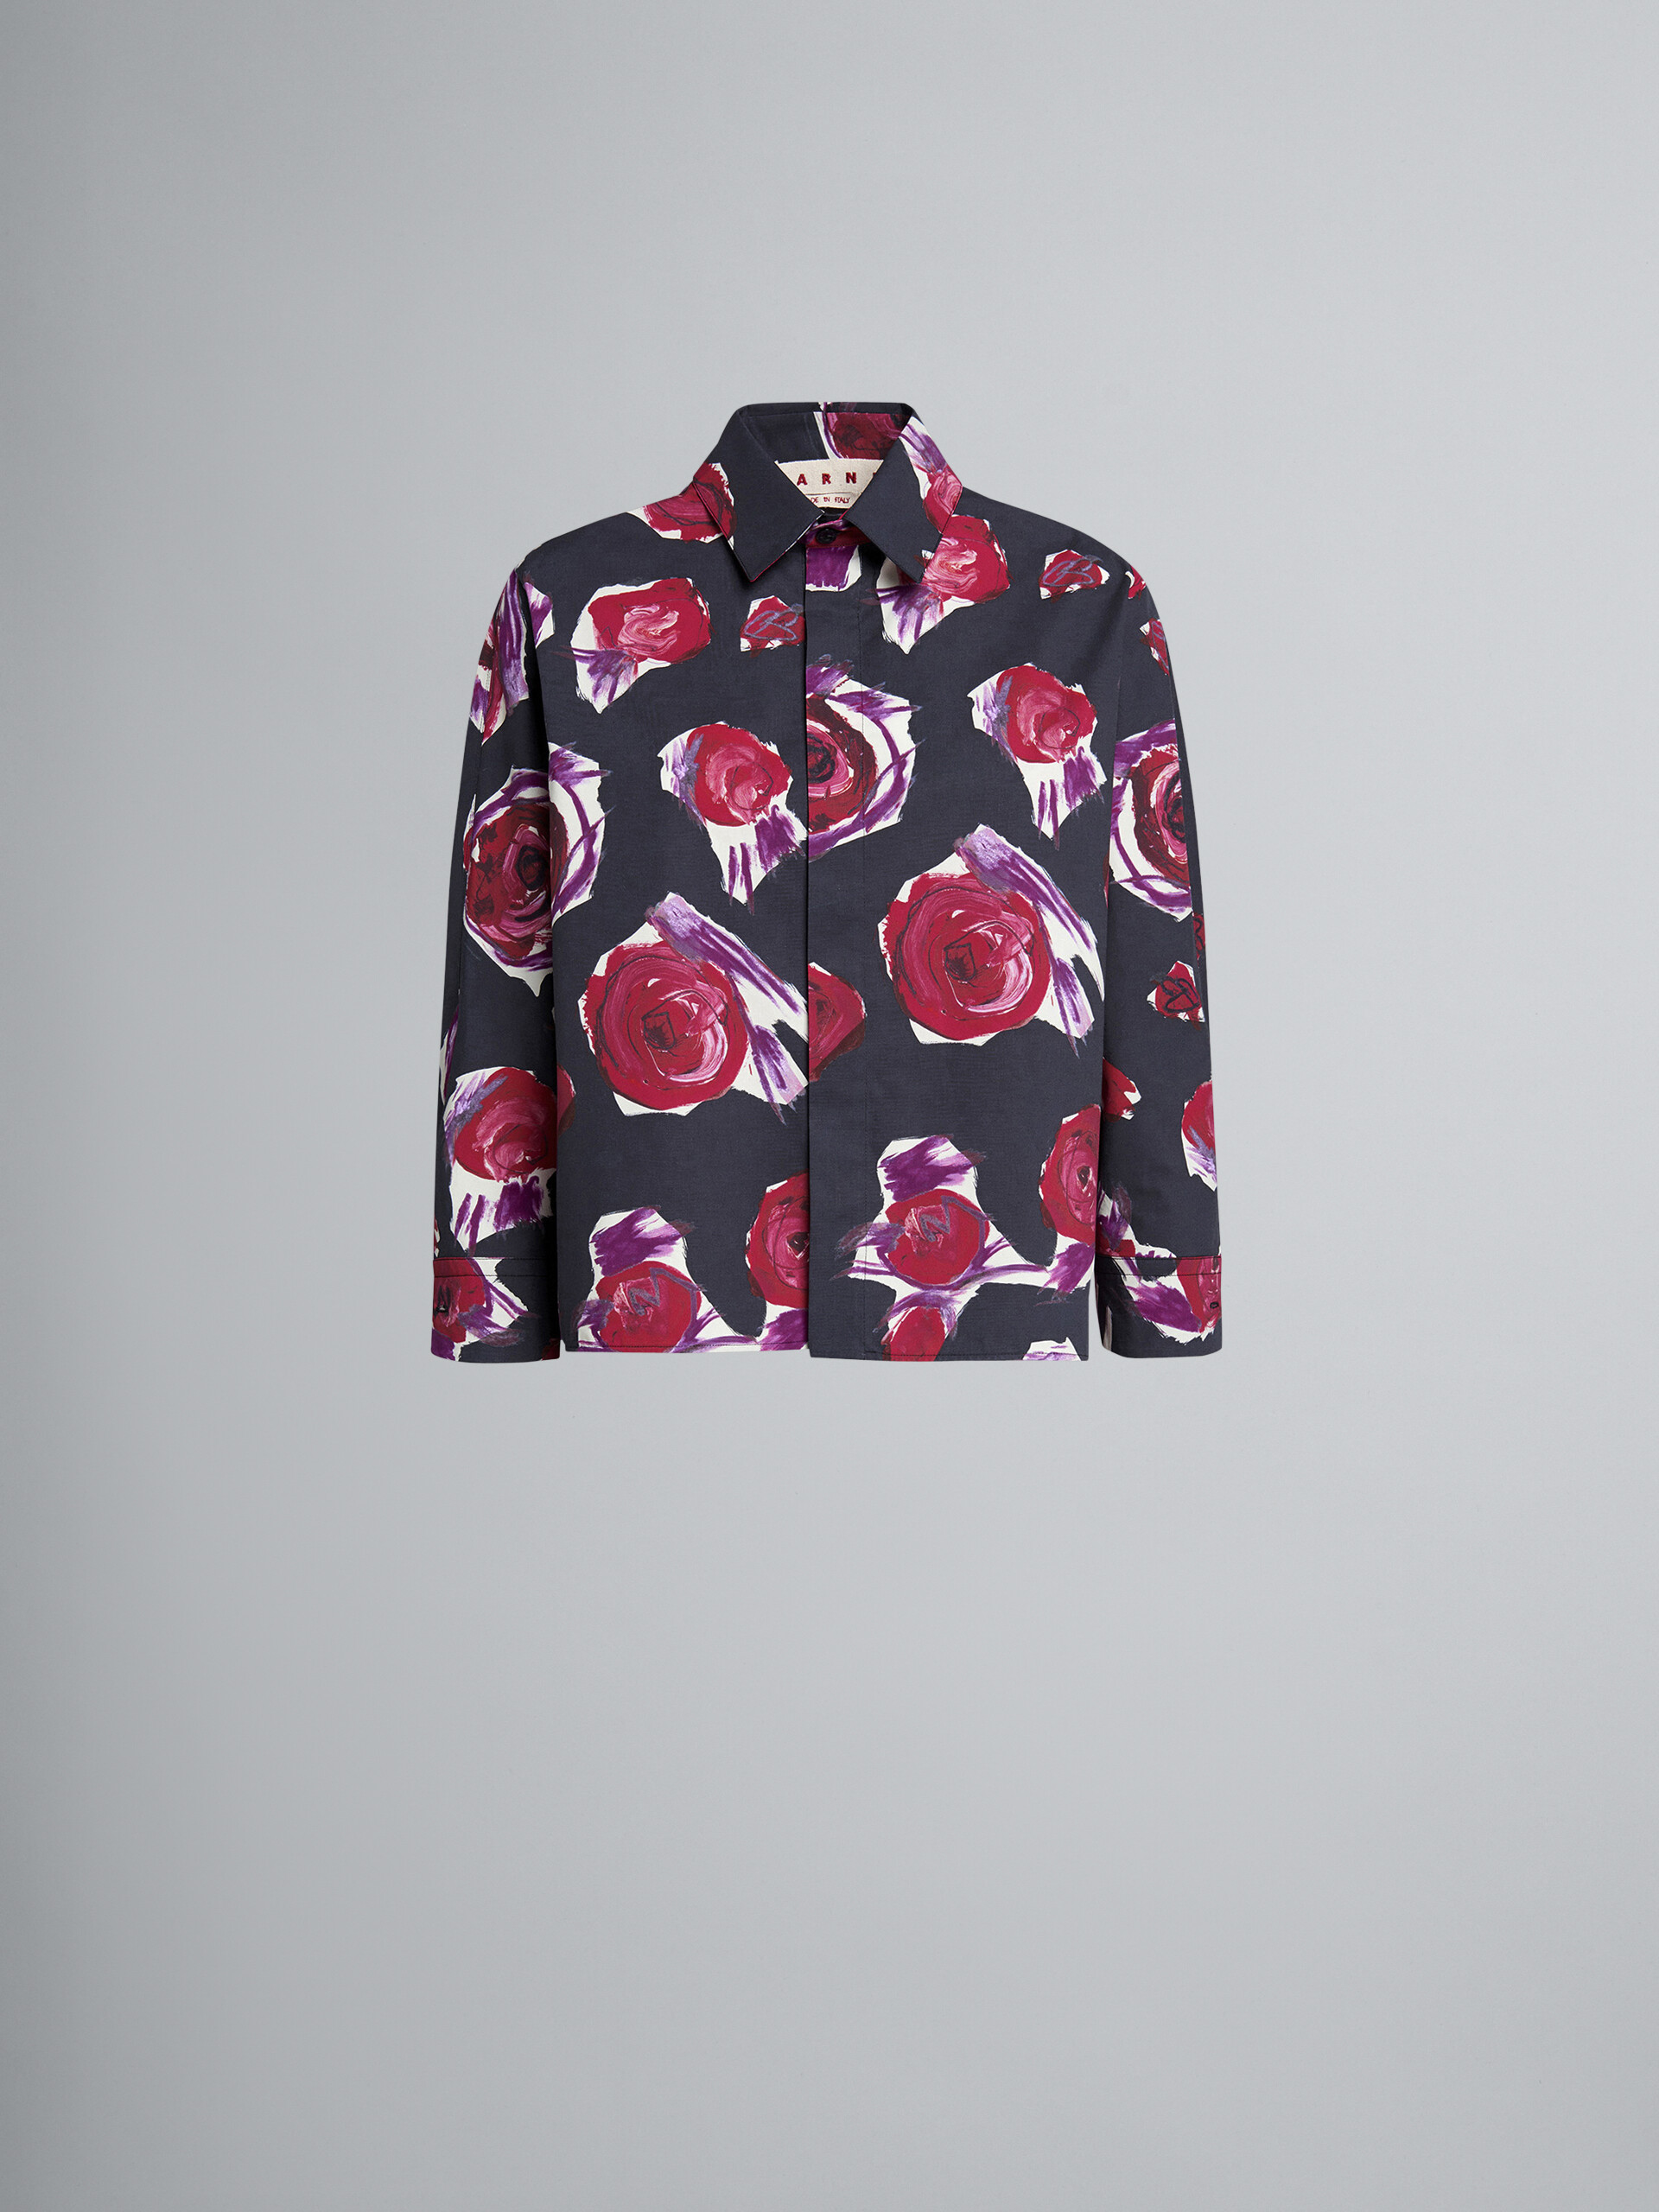 Camicia svasata in popeline stampa Spinning Roses - Camicie - Image 1